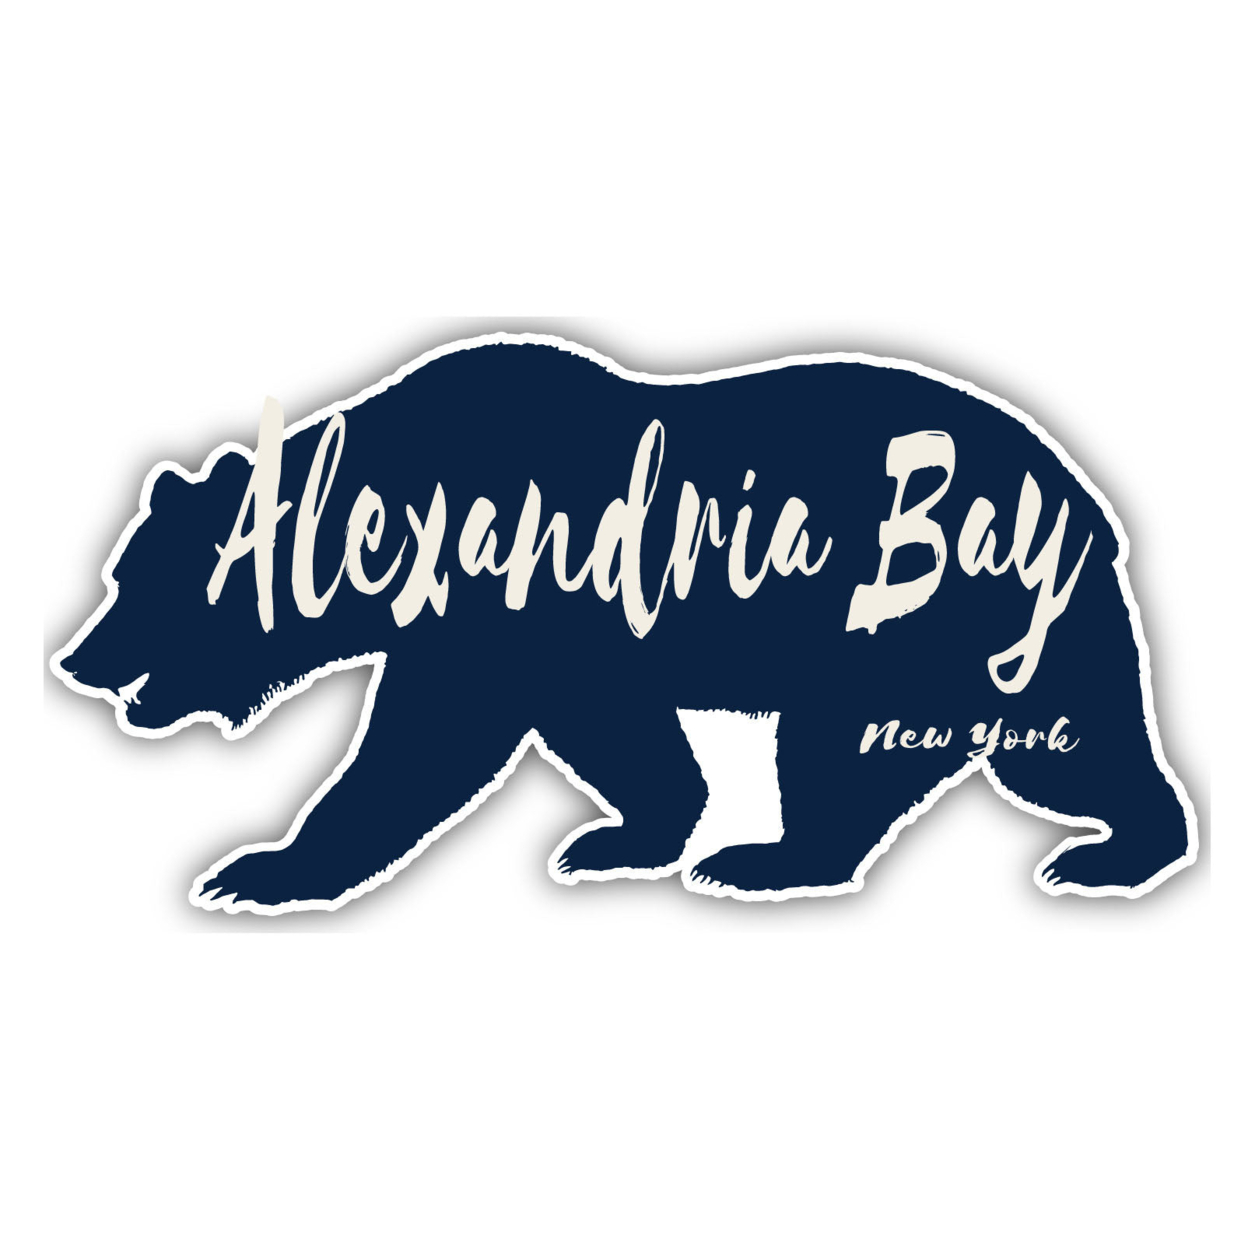 Alexandria Bay New York Souvenir Decorative Stickers (Choose Theme And Size) - 4-Pack, 4-Inch, Bear